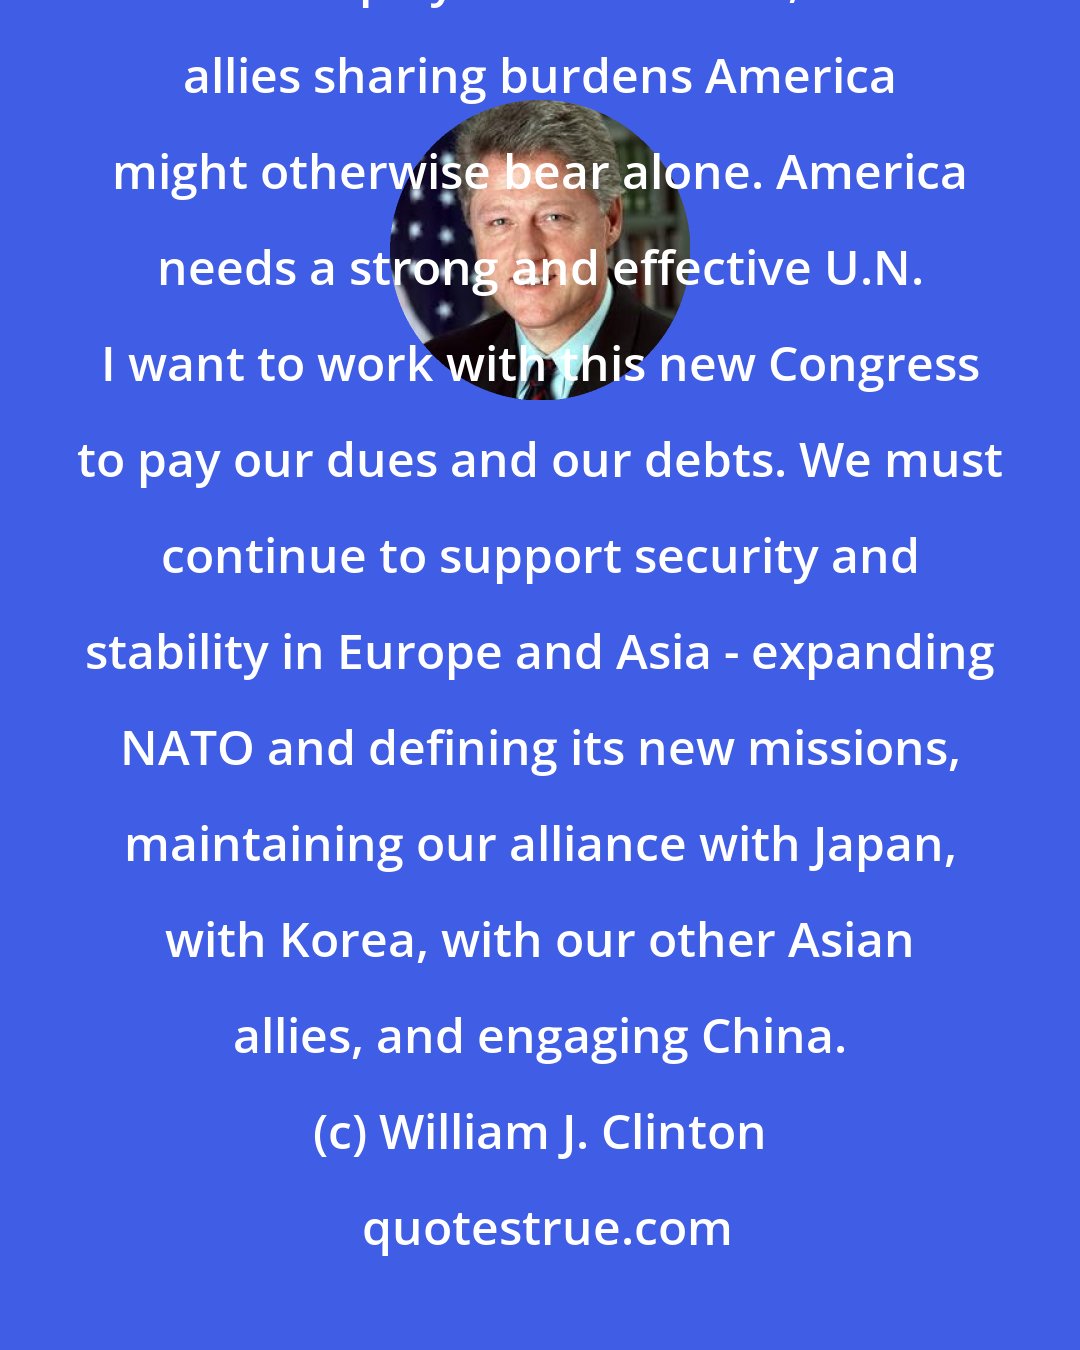 William J. Clinton: The new century demands new partnerships for peace and security. The United Nations plays a crucial role, with allies sharing burdens America might otherwise bear alone. America needs a strong and effective U.N. I want to work with this new Congress to pay our dues and our debts. We must continue to support security and stability in Europe and Asia - expanding NATO and defining its new missions, maintaining our alliance with Japan, with Korea, with our other Asian allies, and engaging China.